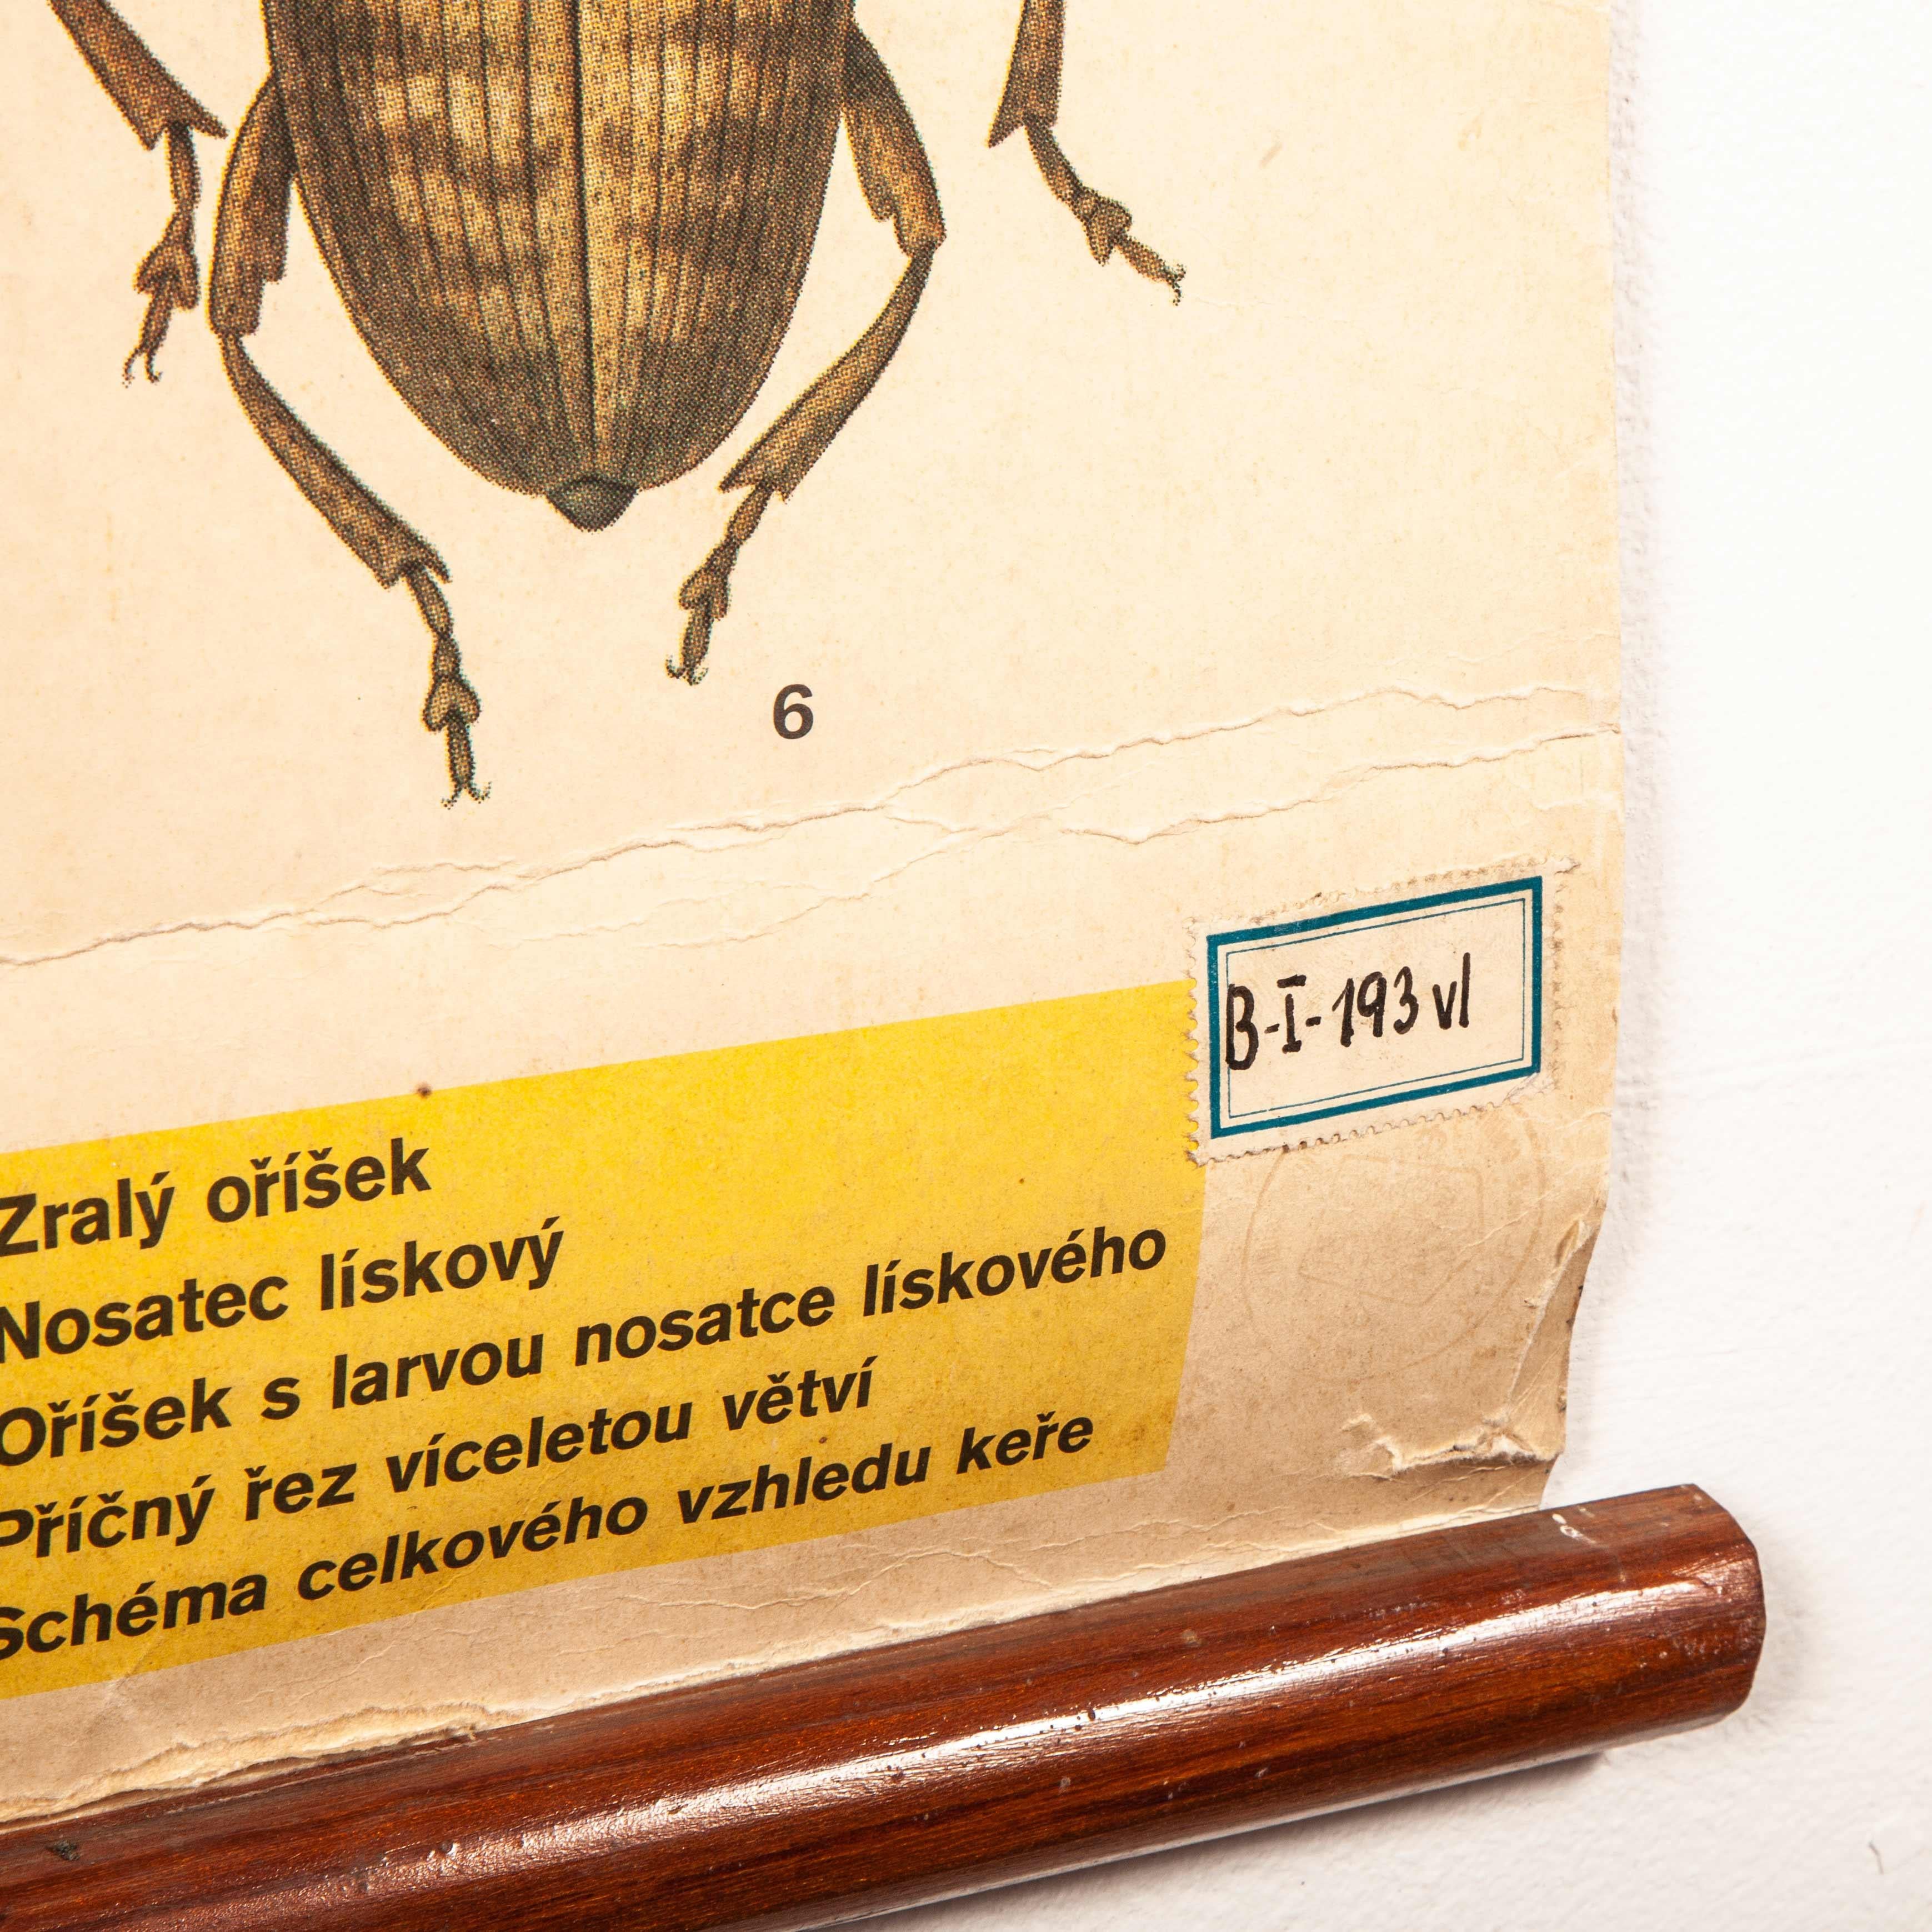 Early 20th century plant and insect chart
Early 20th century plant and insect chart. An educational botanical poster from the Czech Republic. The poster is fixed on split wooden dowels. See photographs below to see condition of poster. In excellent